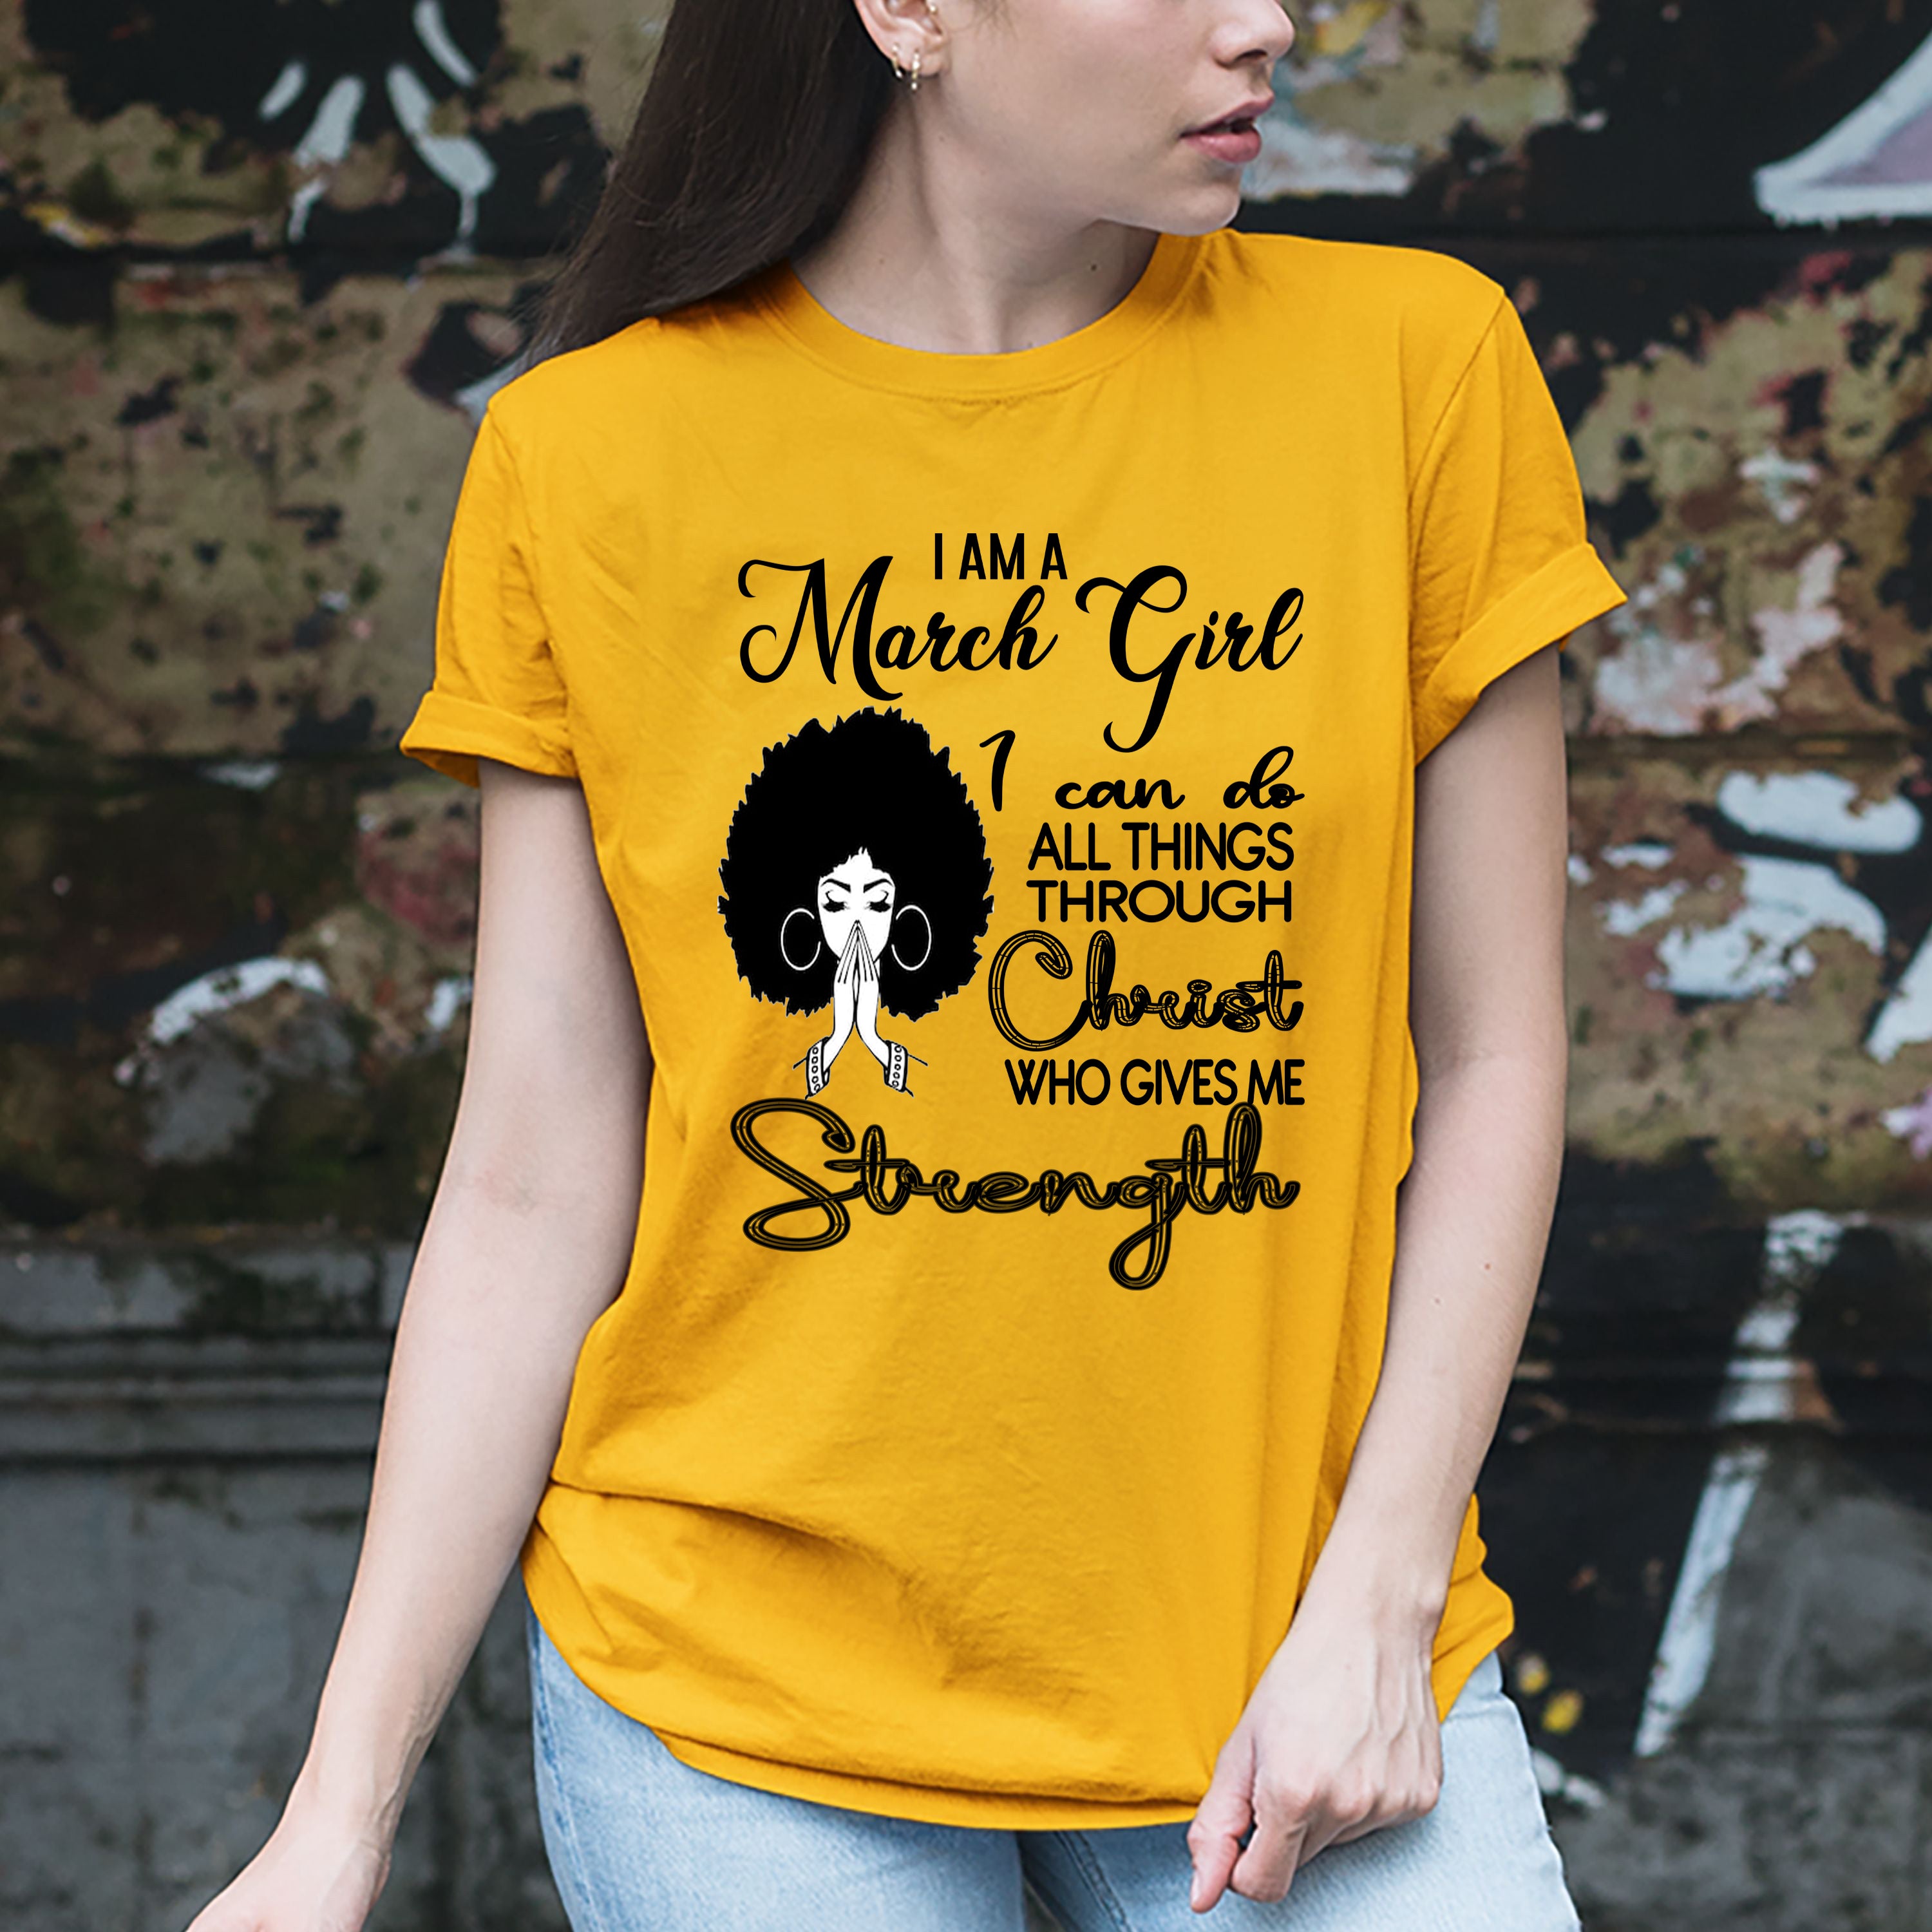 "MARCH GIRL Can Do All Things Through Christ Who Gives Me Strength",T-Shirt.